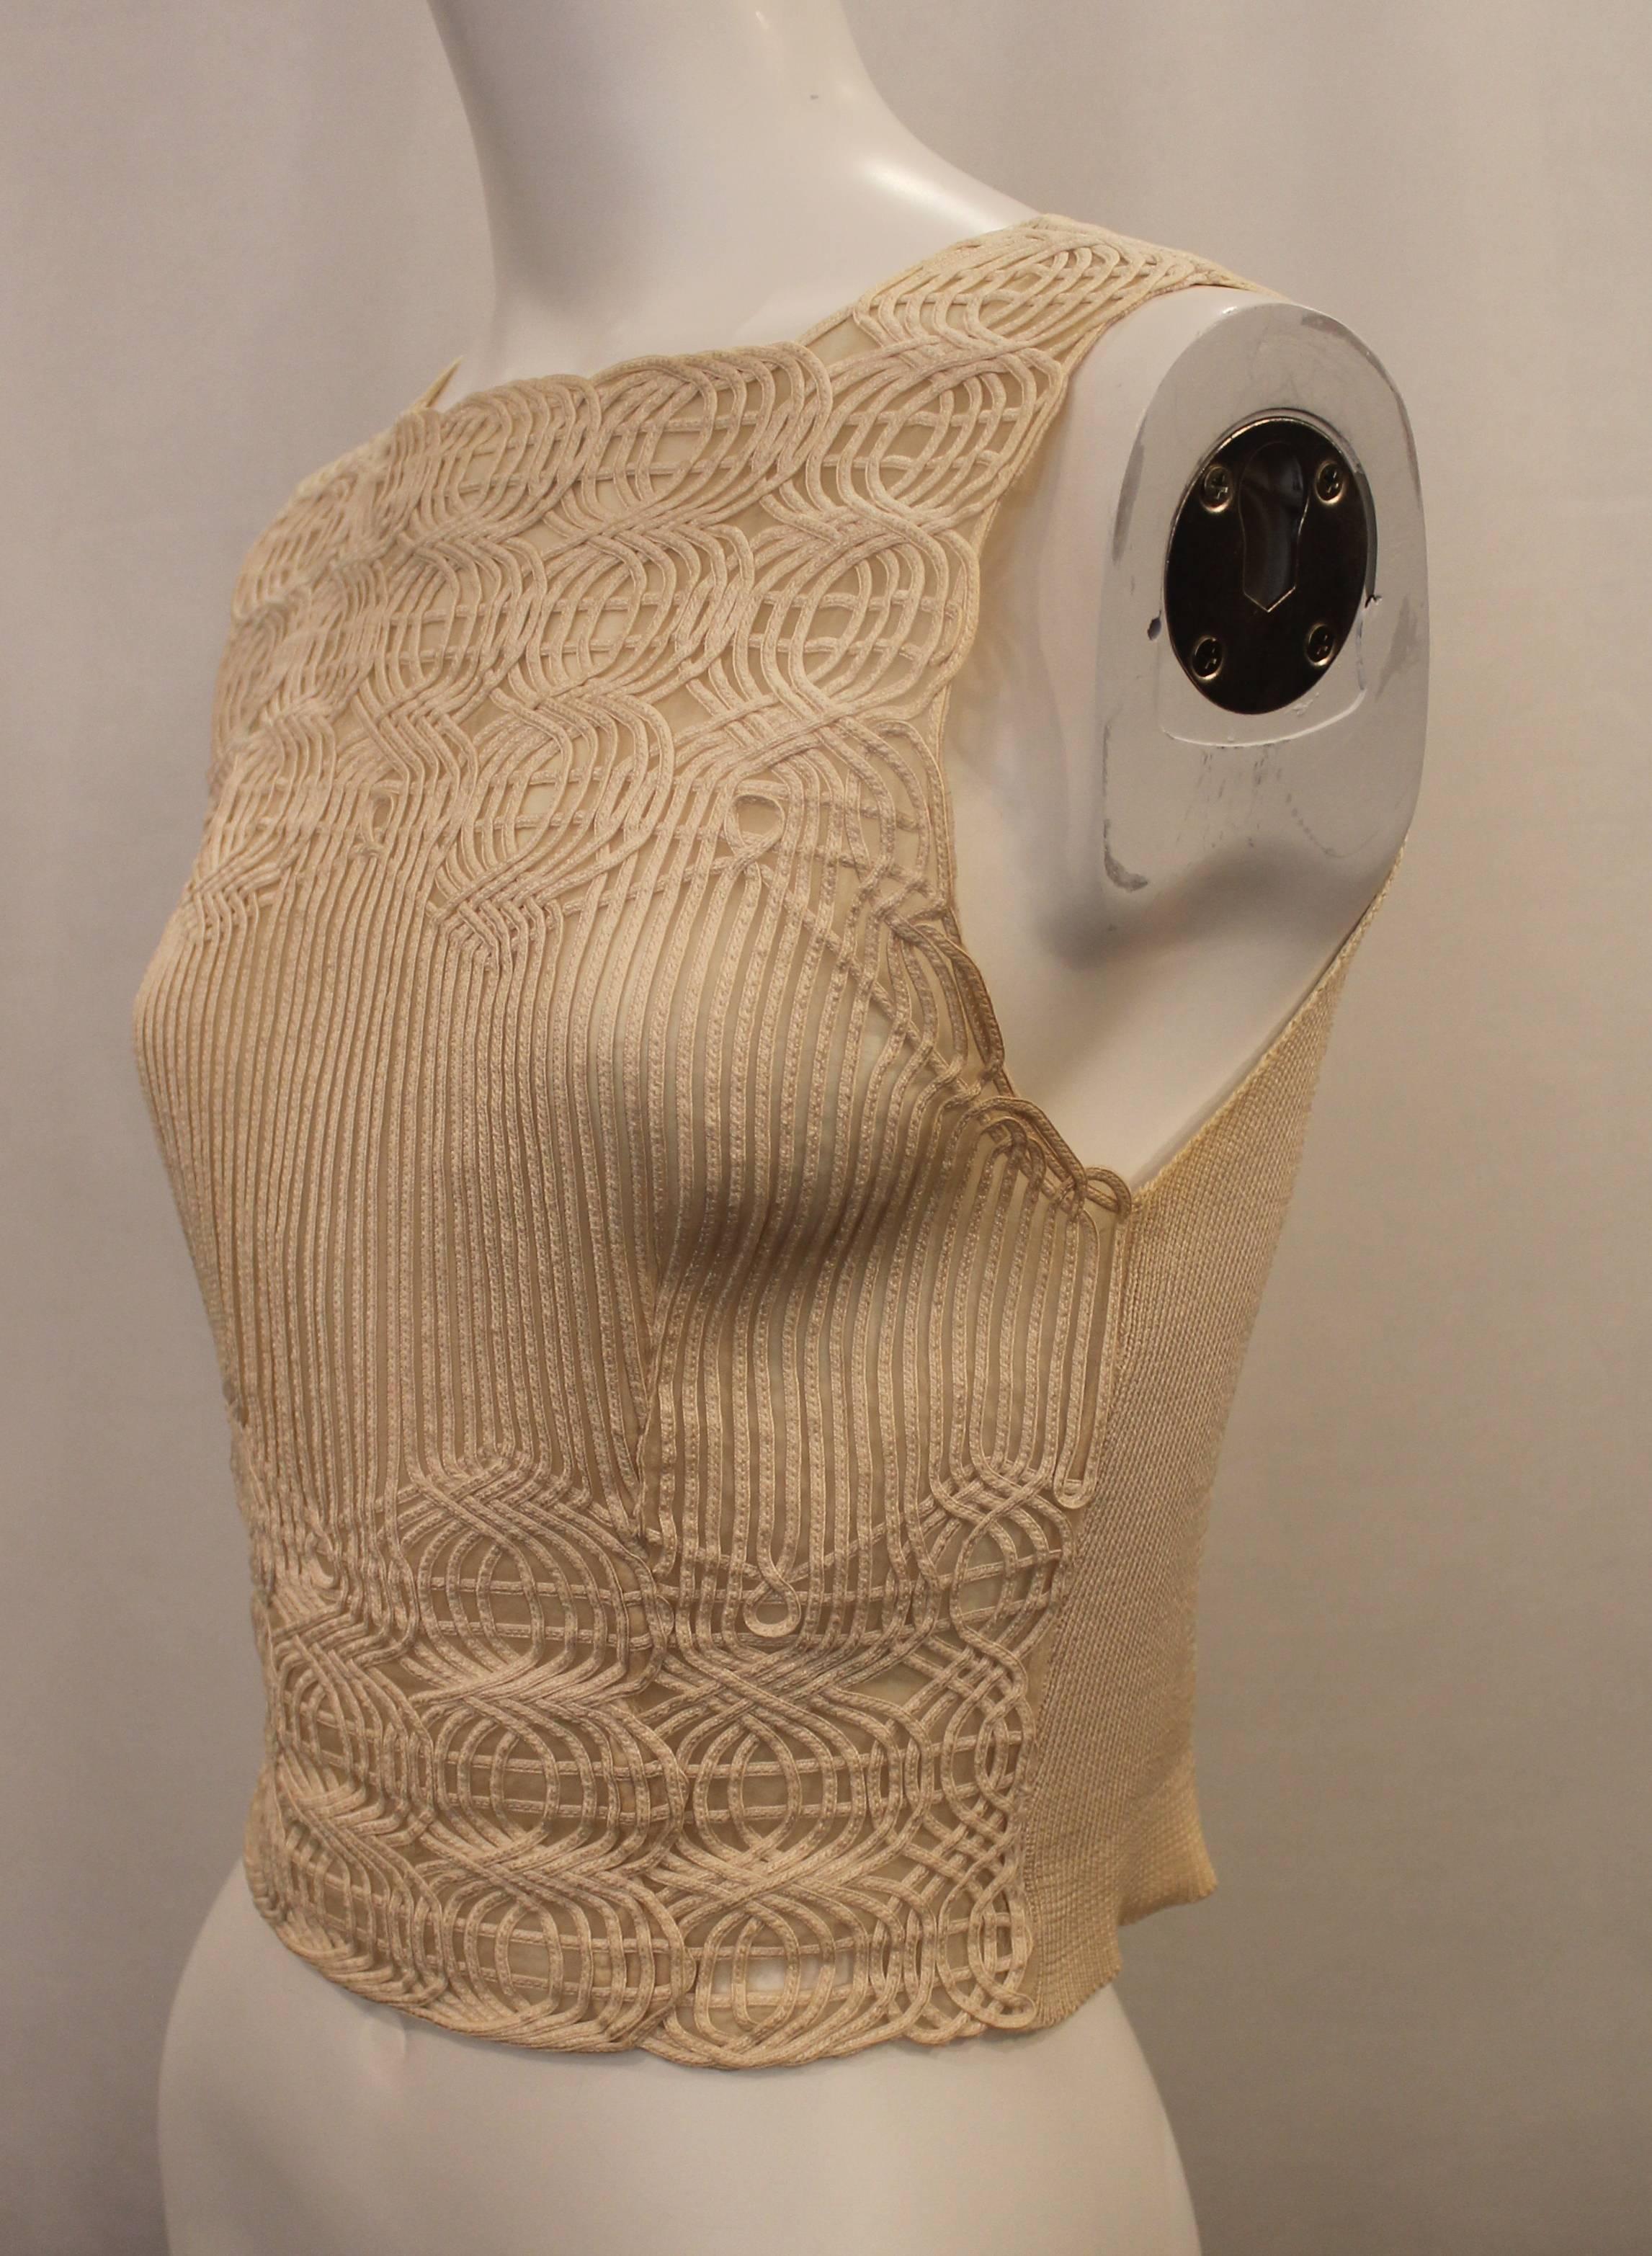 Valentino Ivory Lace Soutache Sleeveless Cropped Top - S - 1990's. This top is in good vintage condition with general wear and some discoloration near the armpit. It features a lace soutache design in the front with a knit-like